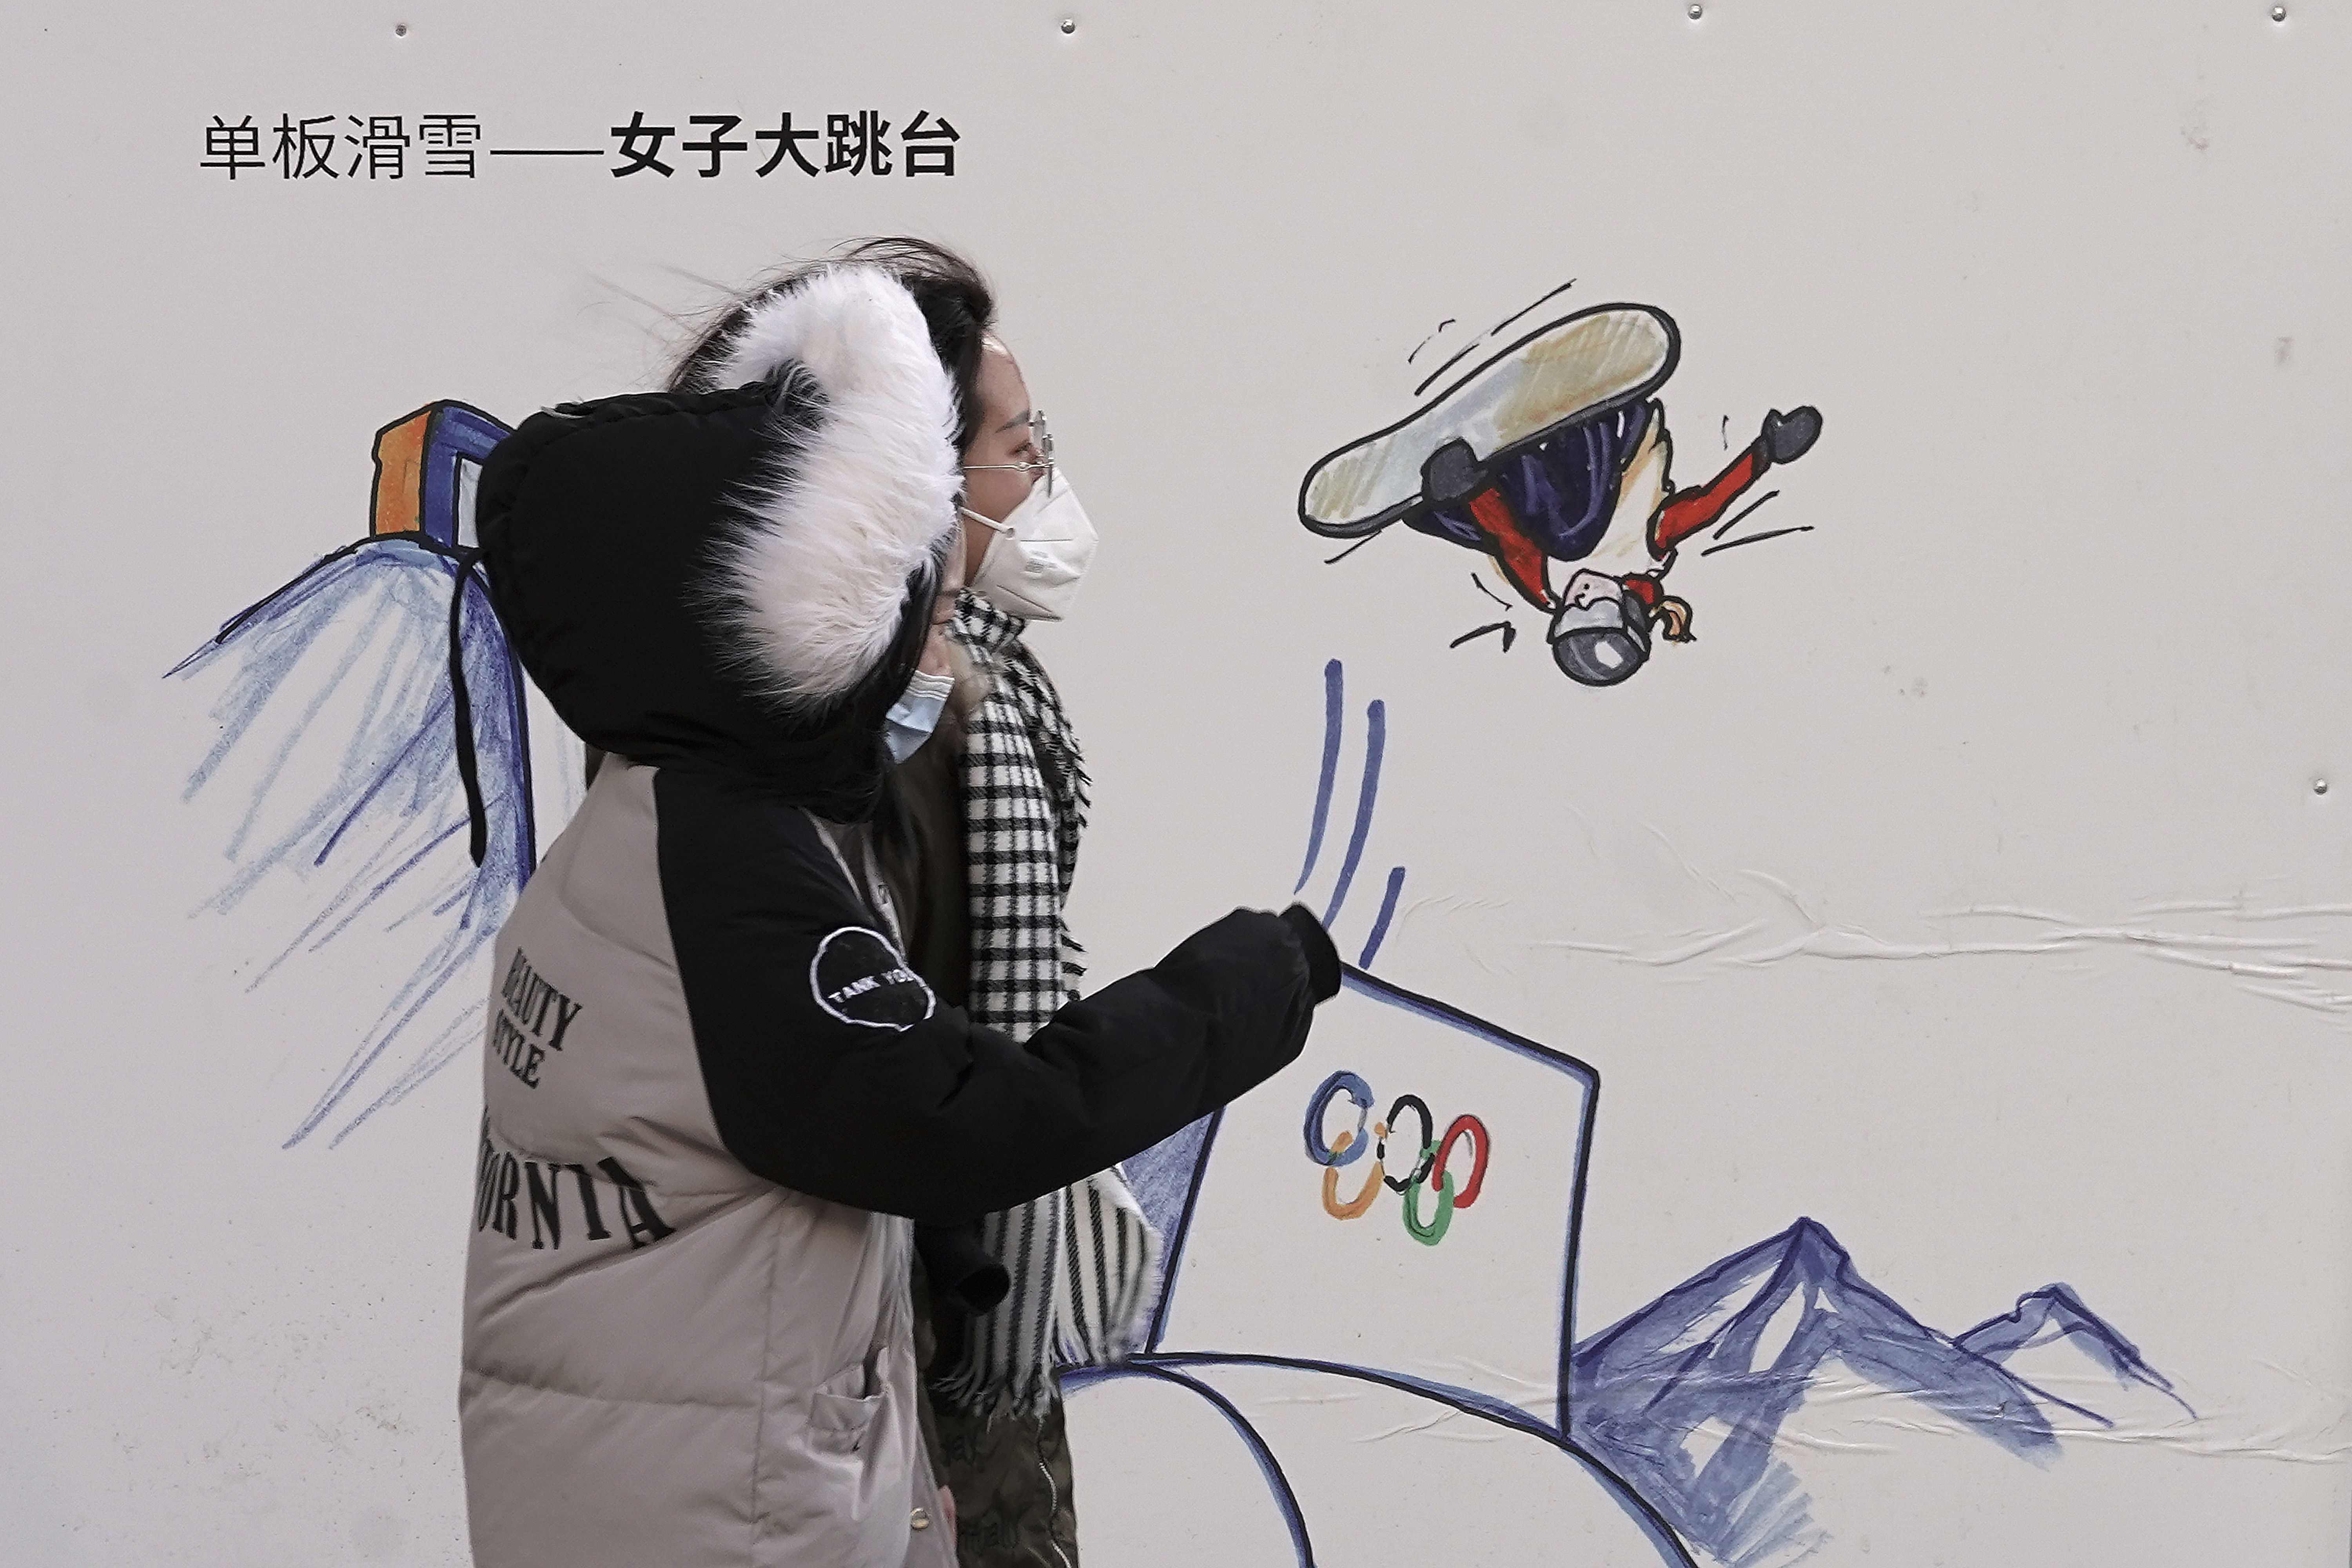 Women wearing face masks to help curb the spread of the coronavirus walk by a board depicting a Winter Olympics snowboard event at a shopping mall in Beijing, Wednesday, Jan. 6, 2021. China's Hebei province is enforcing stricter control measures following a further rise in coronavirus cases in the province, which is adjacent to the capital Beijing and is due to host events for next year's Winter Olympics. (AP Photo/Andy Wong)